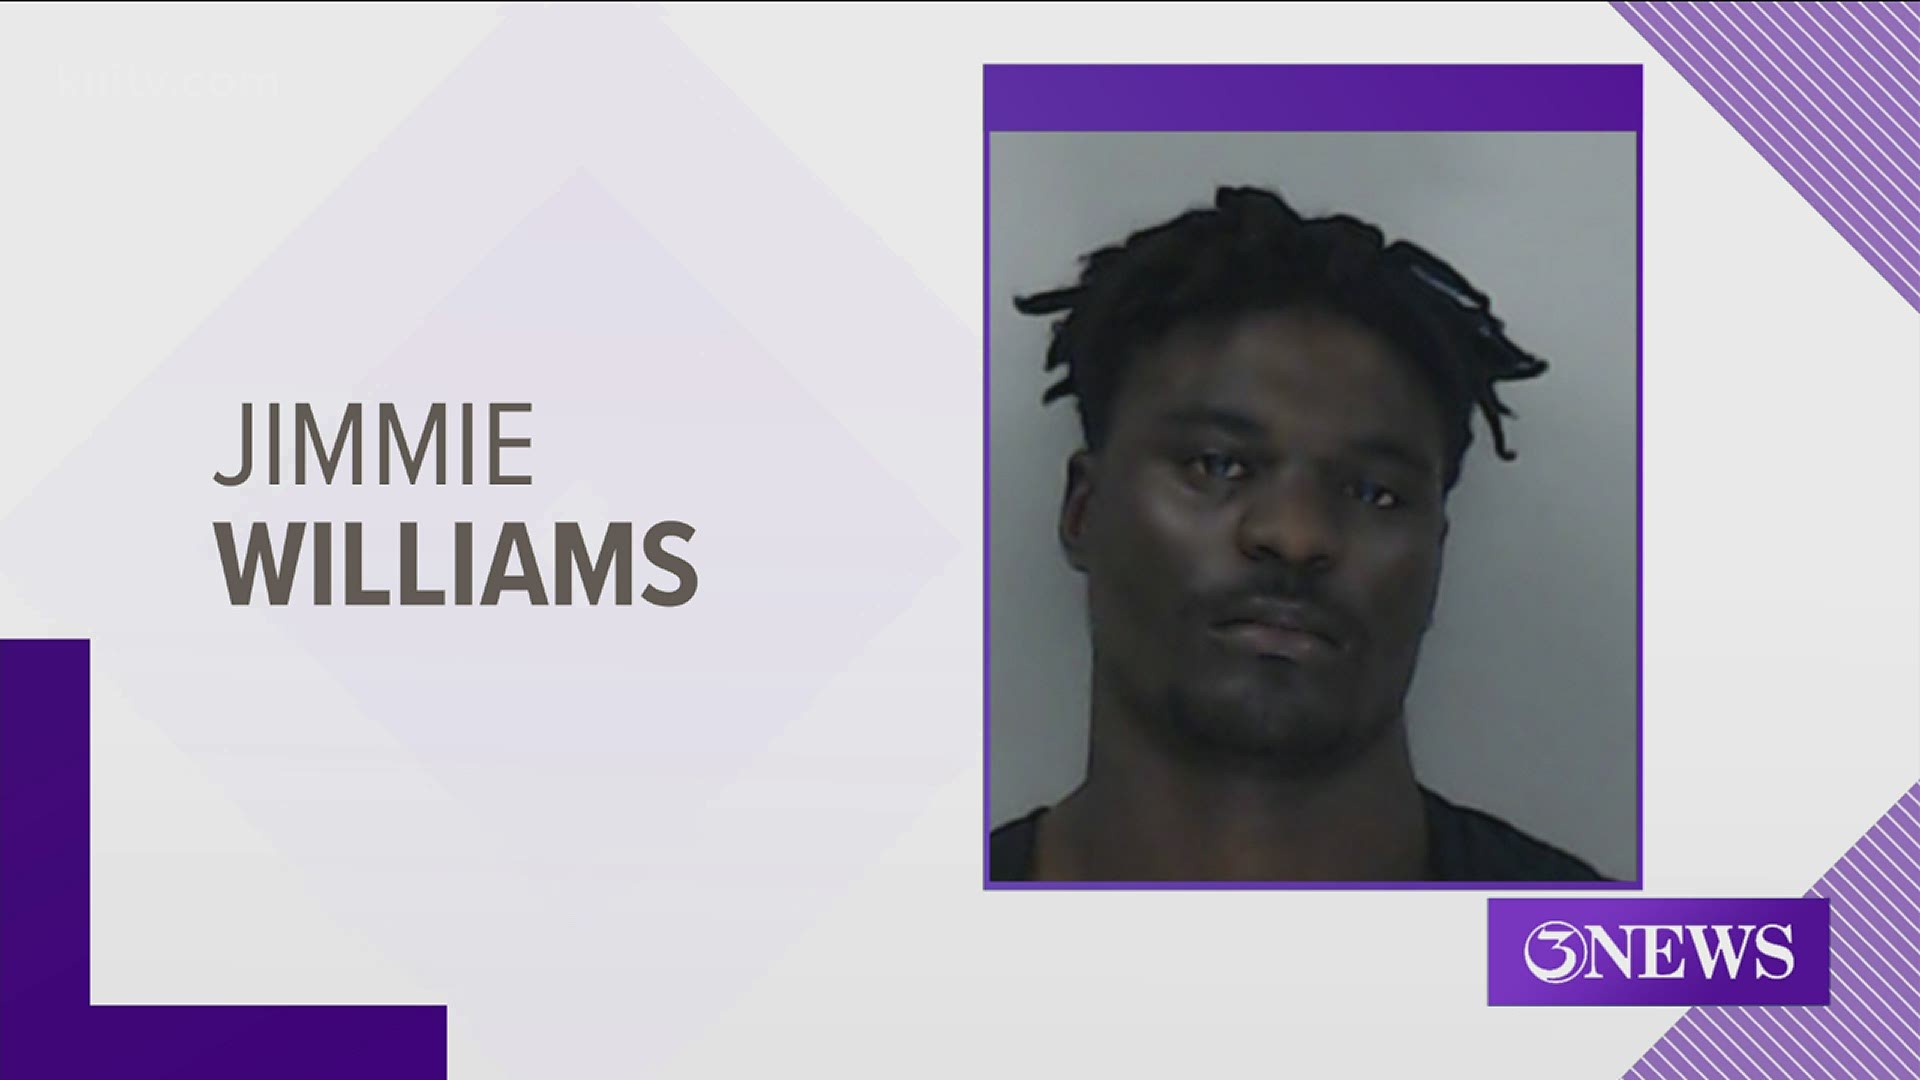 Homicide detectives investigated the case and were able to arrest 21-year-old Jimmie Lee Williams.